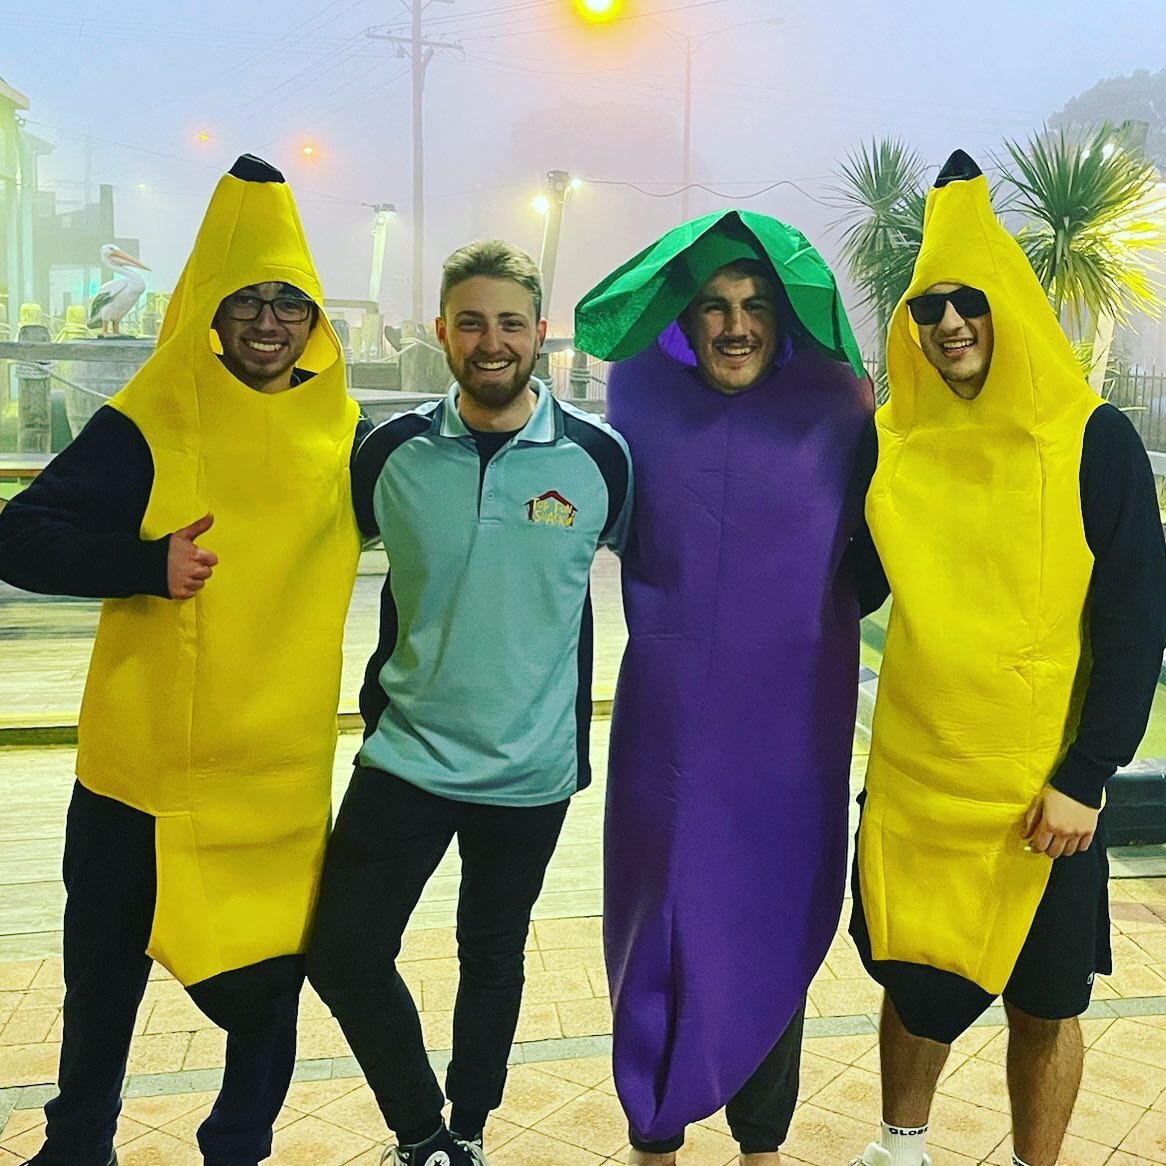 Two bananas and an egg plant walk into a room. Boom boom! All sorts of crazies came out to play today! We&rsquo;re not sure if our main man Ben attracts this type, but he&rsquo;s a champion and is always in a bright mood when he sees people walking t